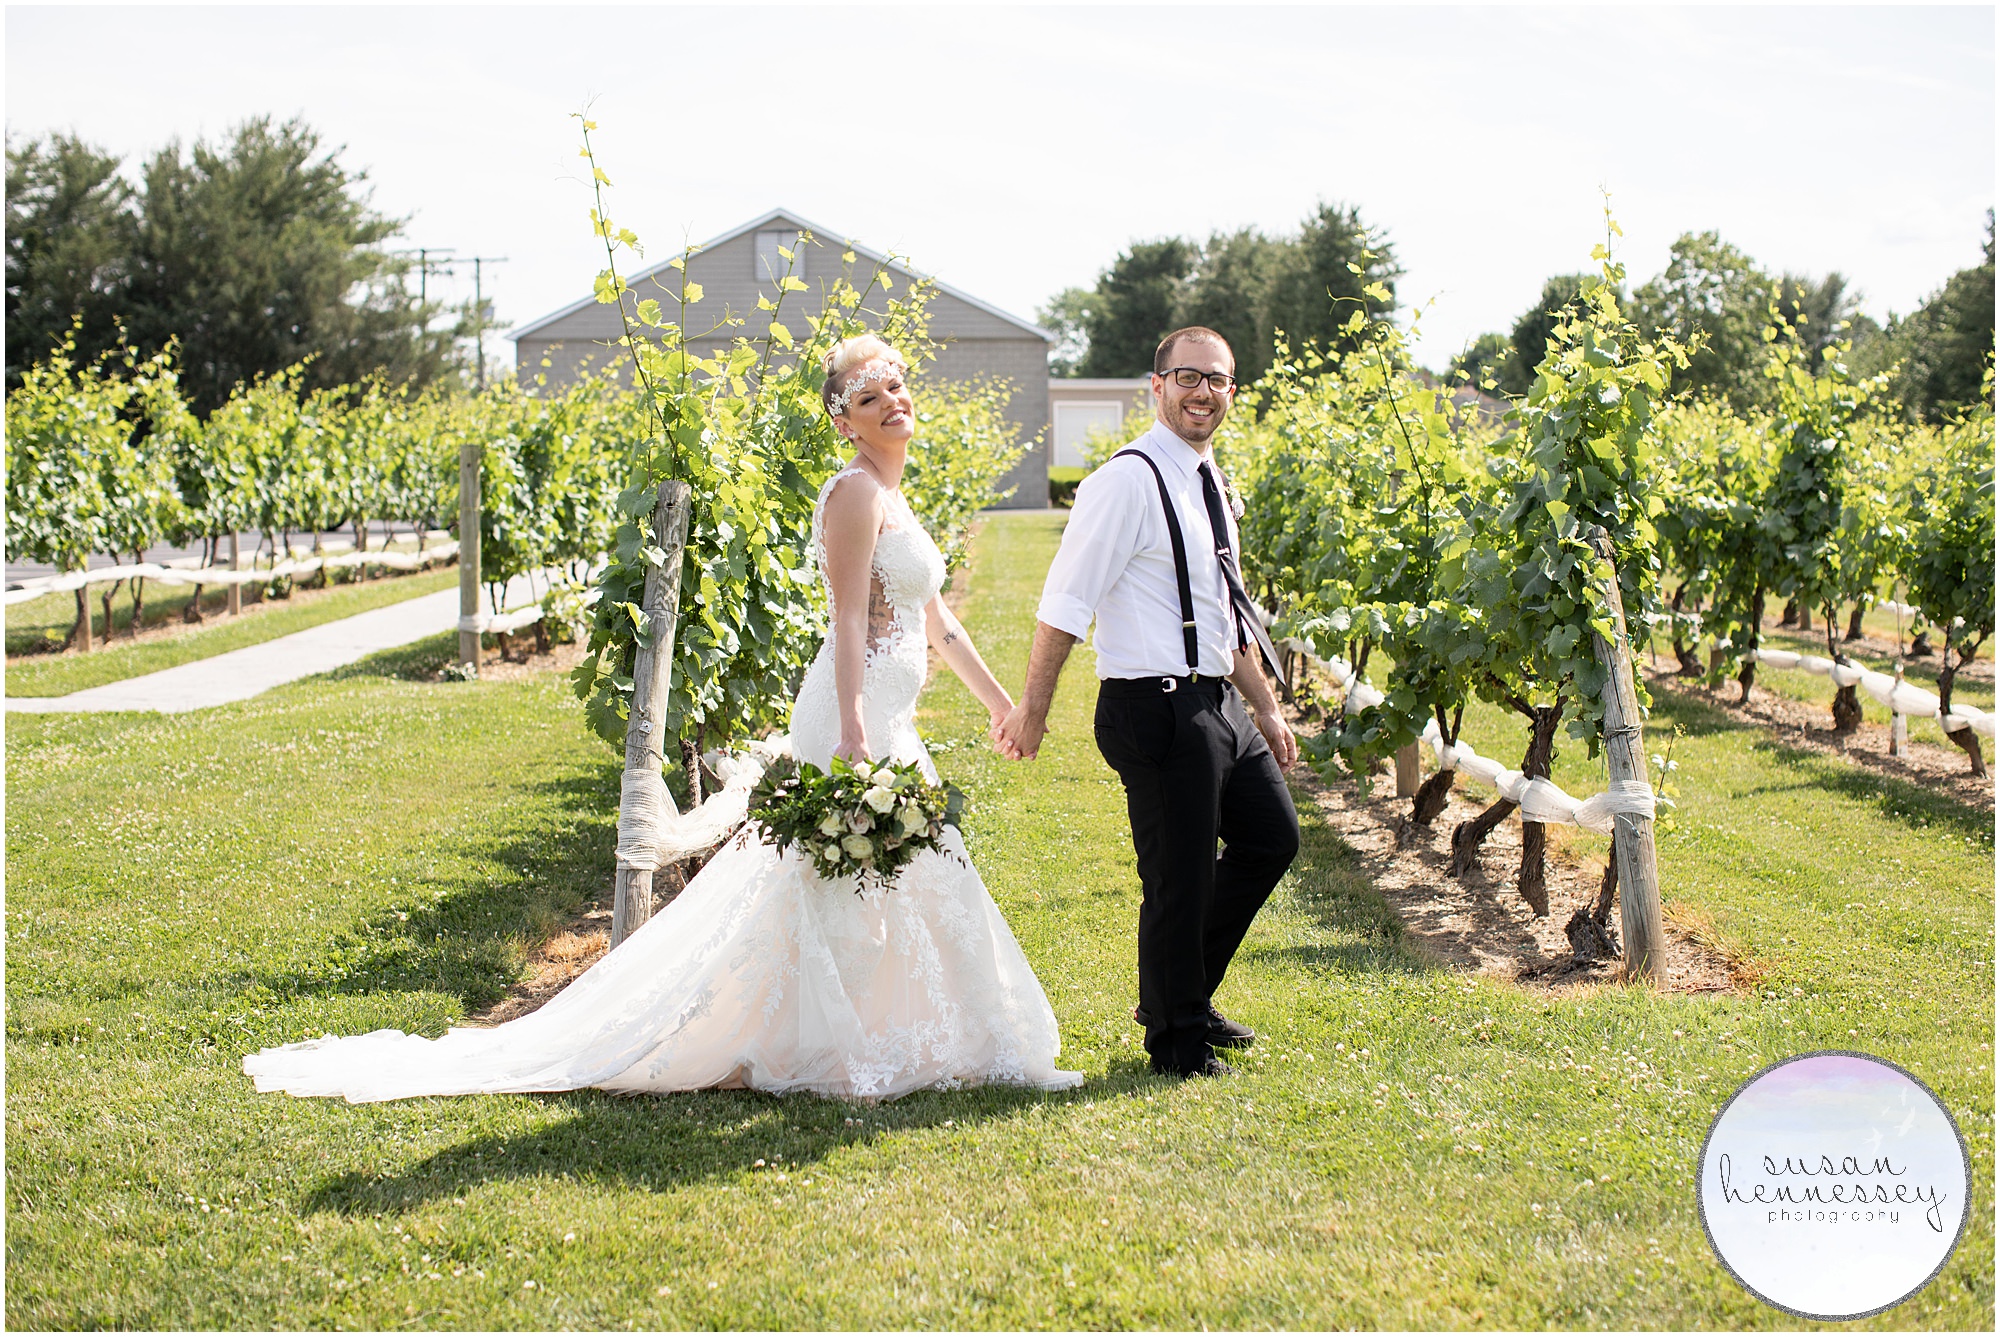 A bride and groom walking in the vineyards